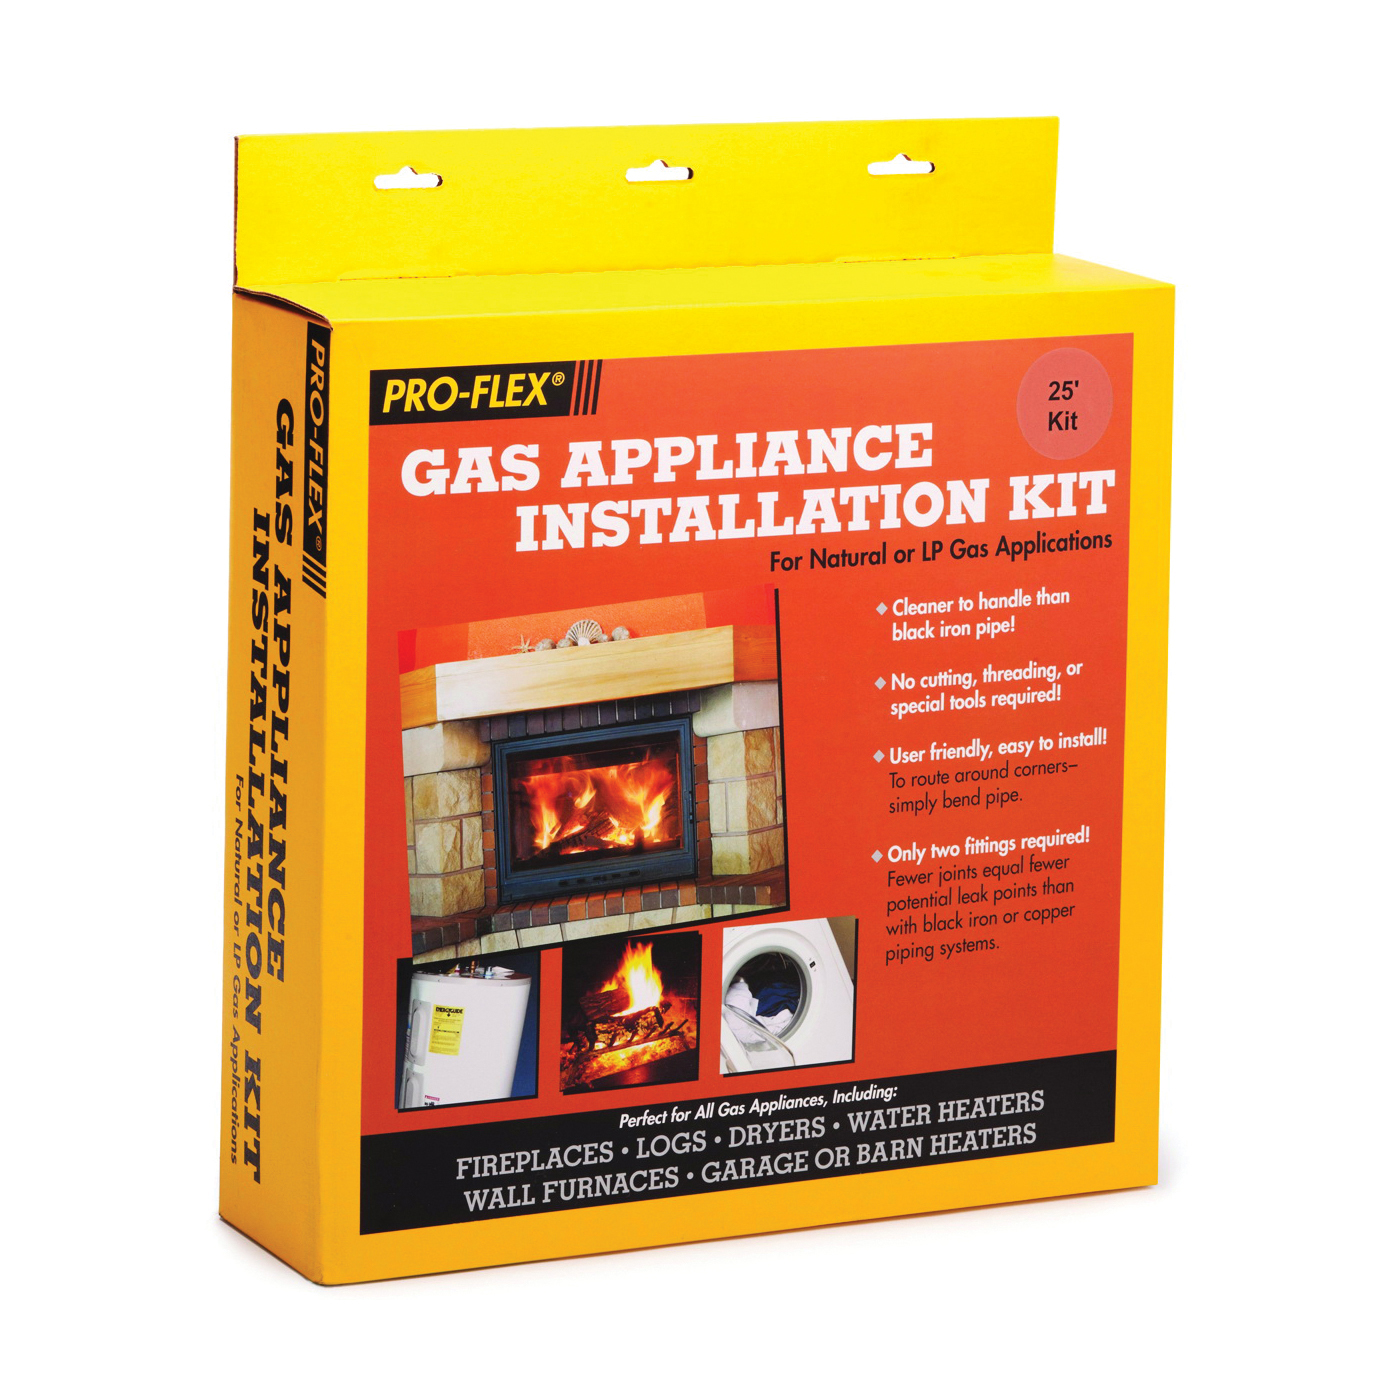 PFSAGK-2000 Gas Appliance Installation Kit, For: Pro-Flex CSST Flexible Gas Piping System